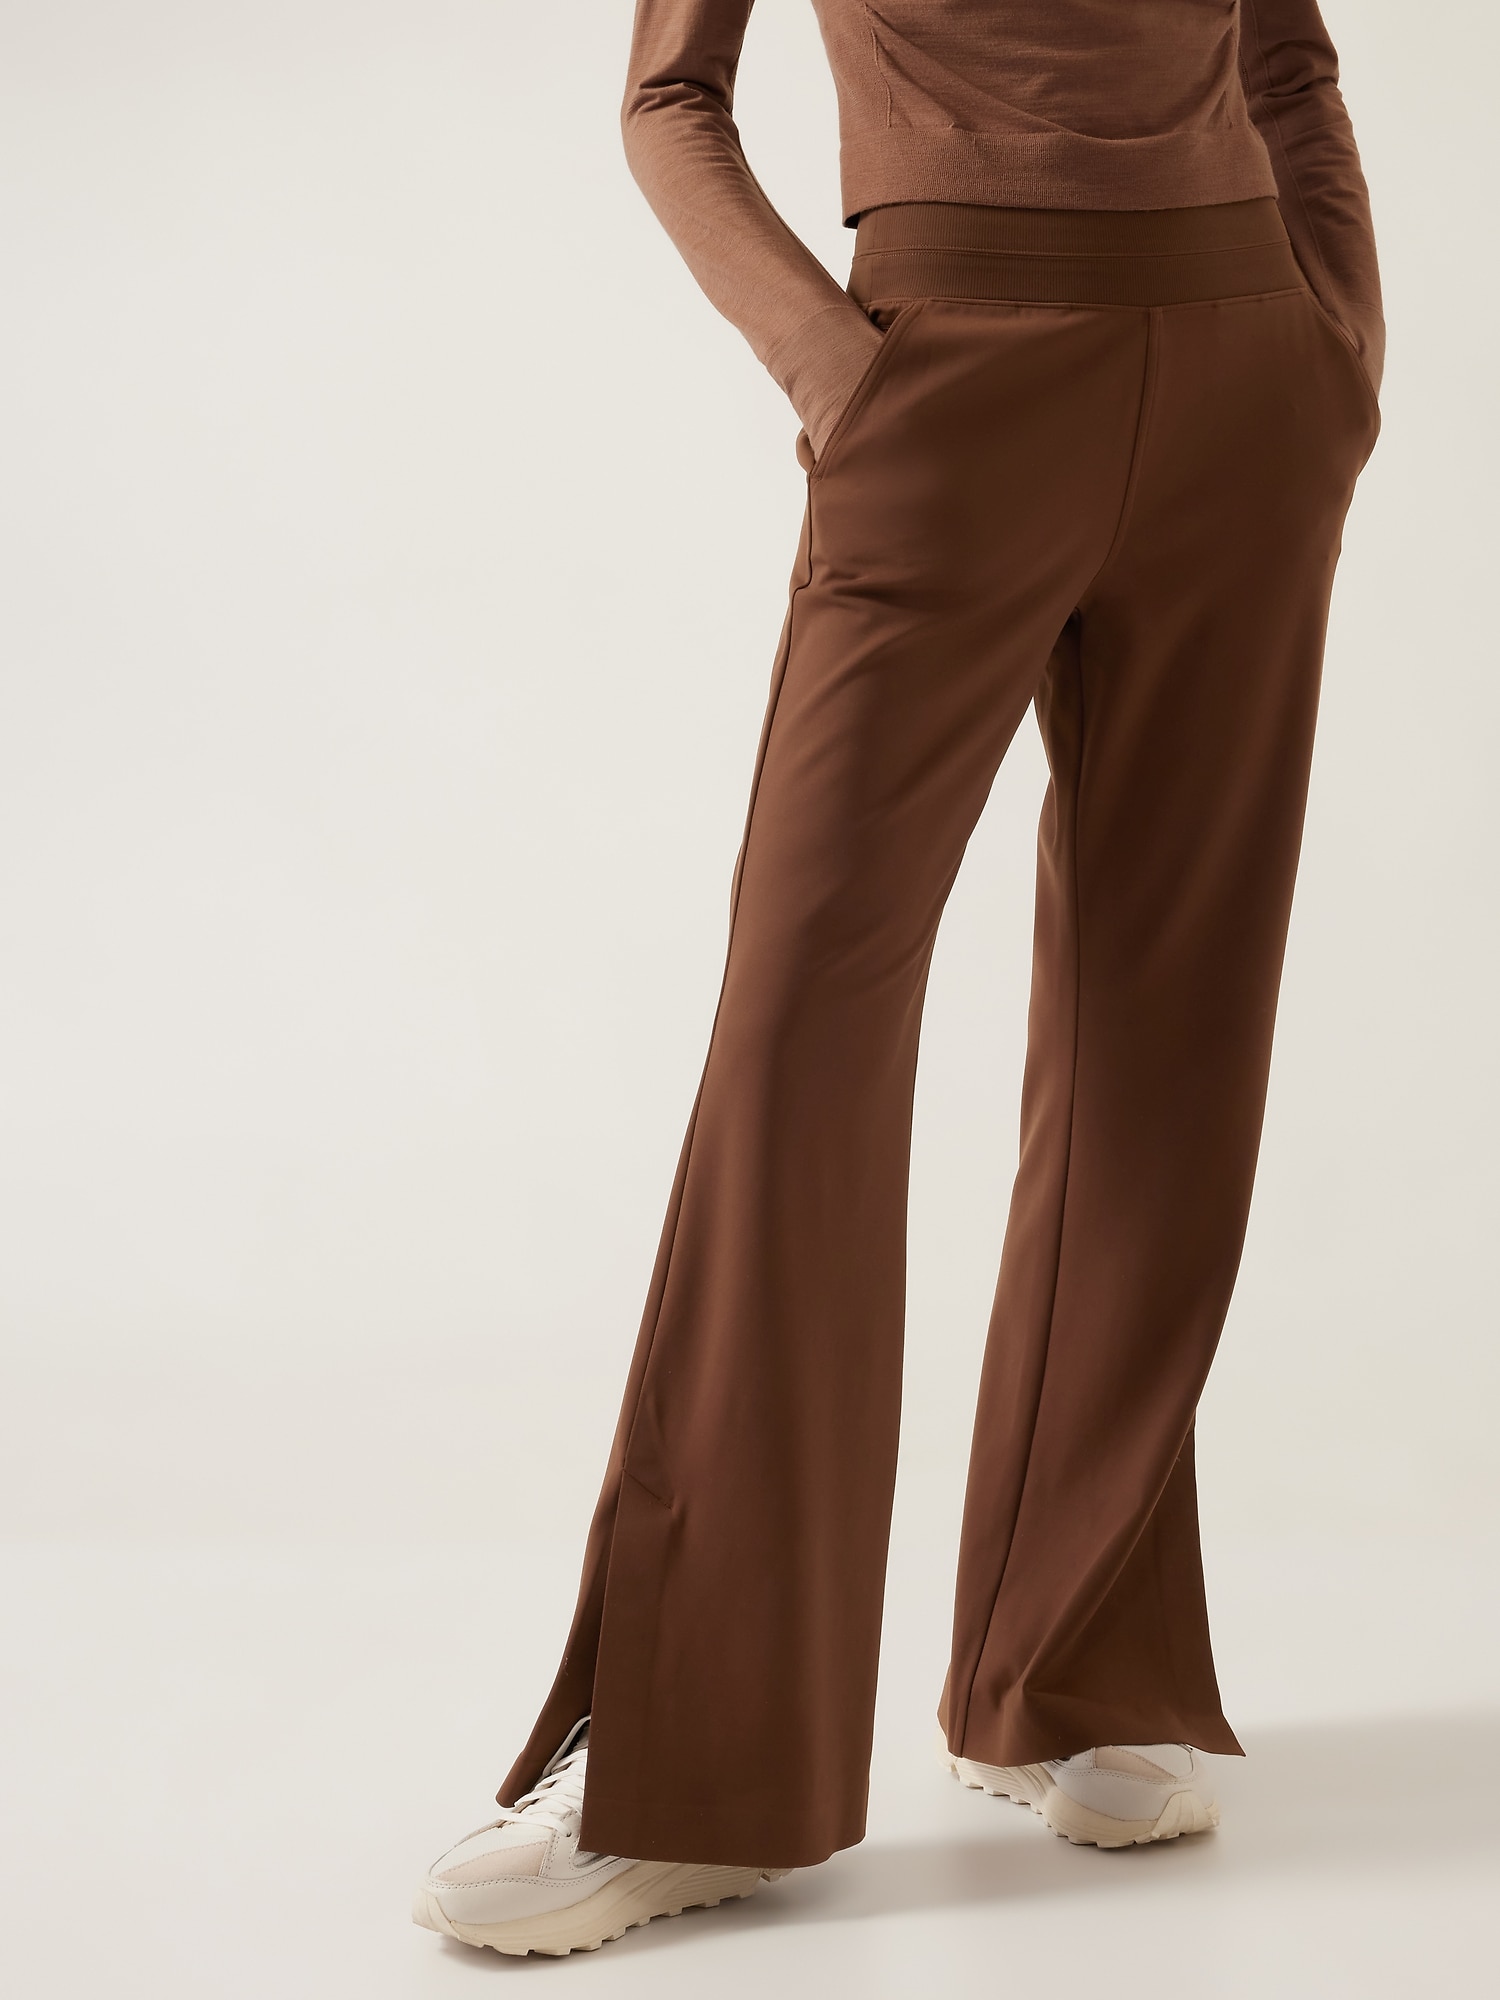 Cheap V Shape Waist Flared Pants Fabulous All Match Skin-friendly Lace Up  Flared Trousers